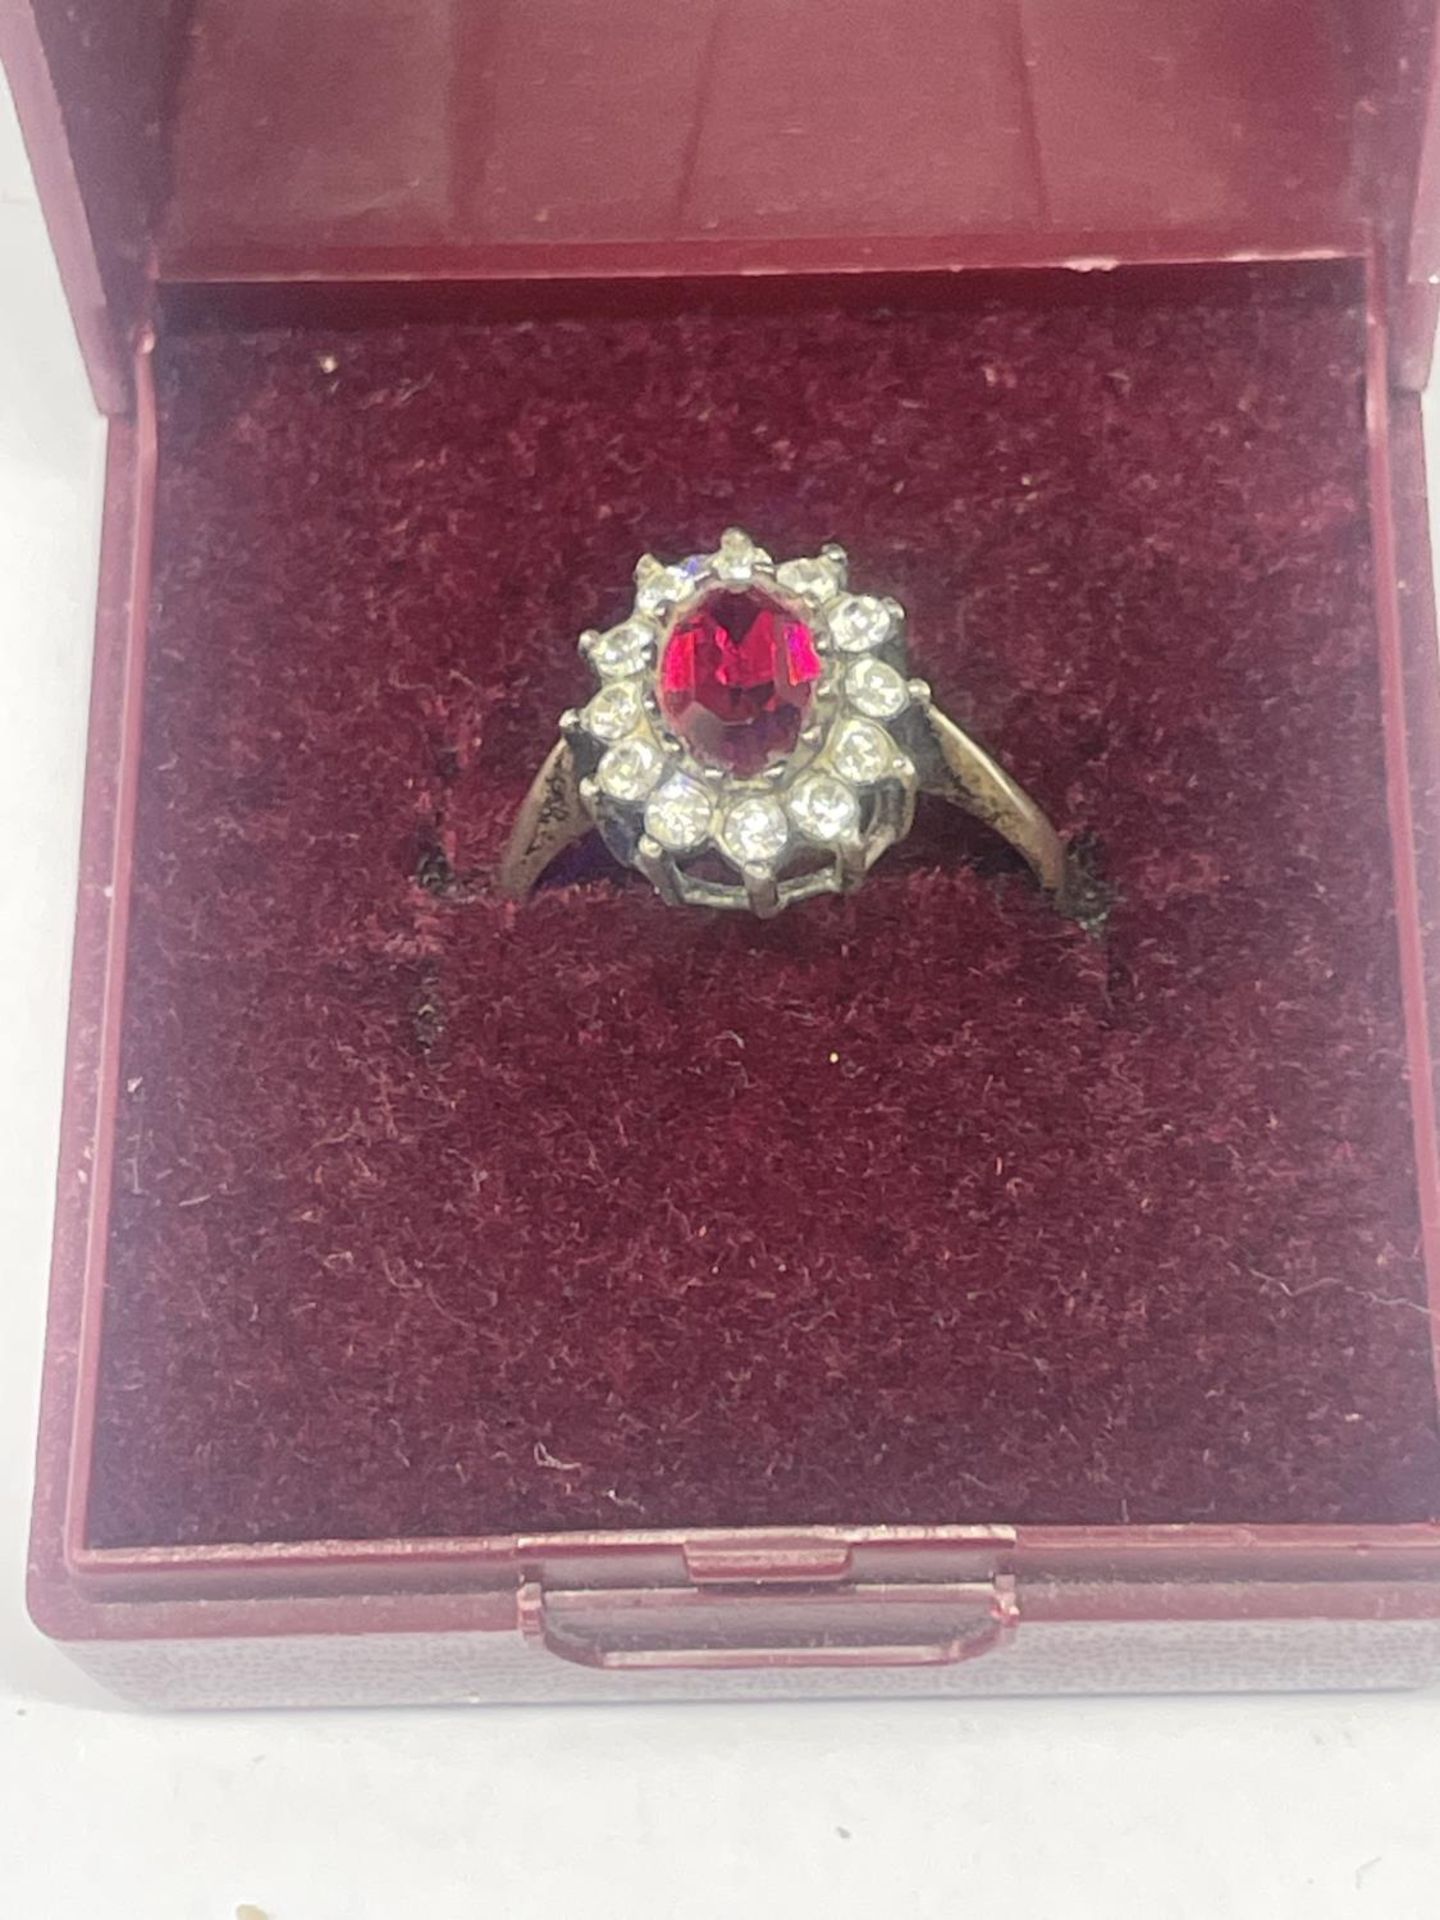 A SILVER RING WITH CENTRE RED STONE SURROUNDED BY CLER STONES IN A PRESENTATION BOX